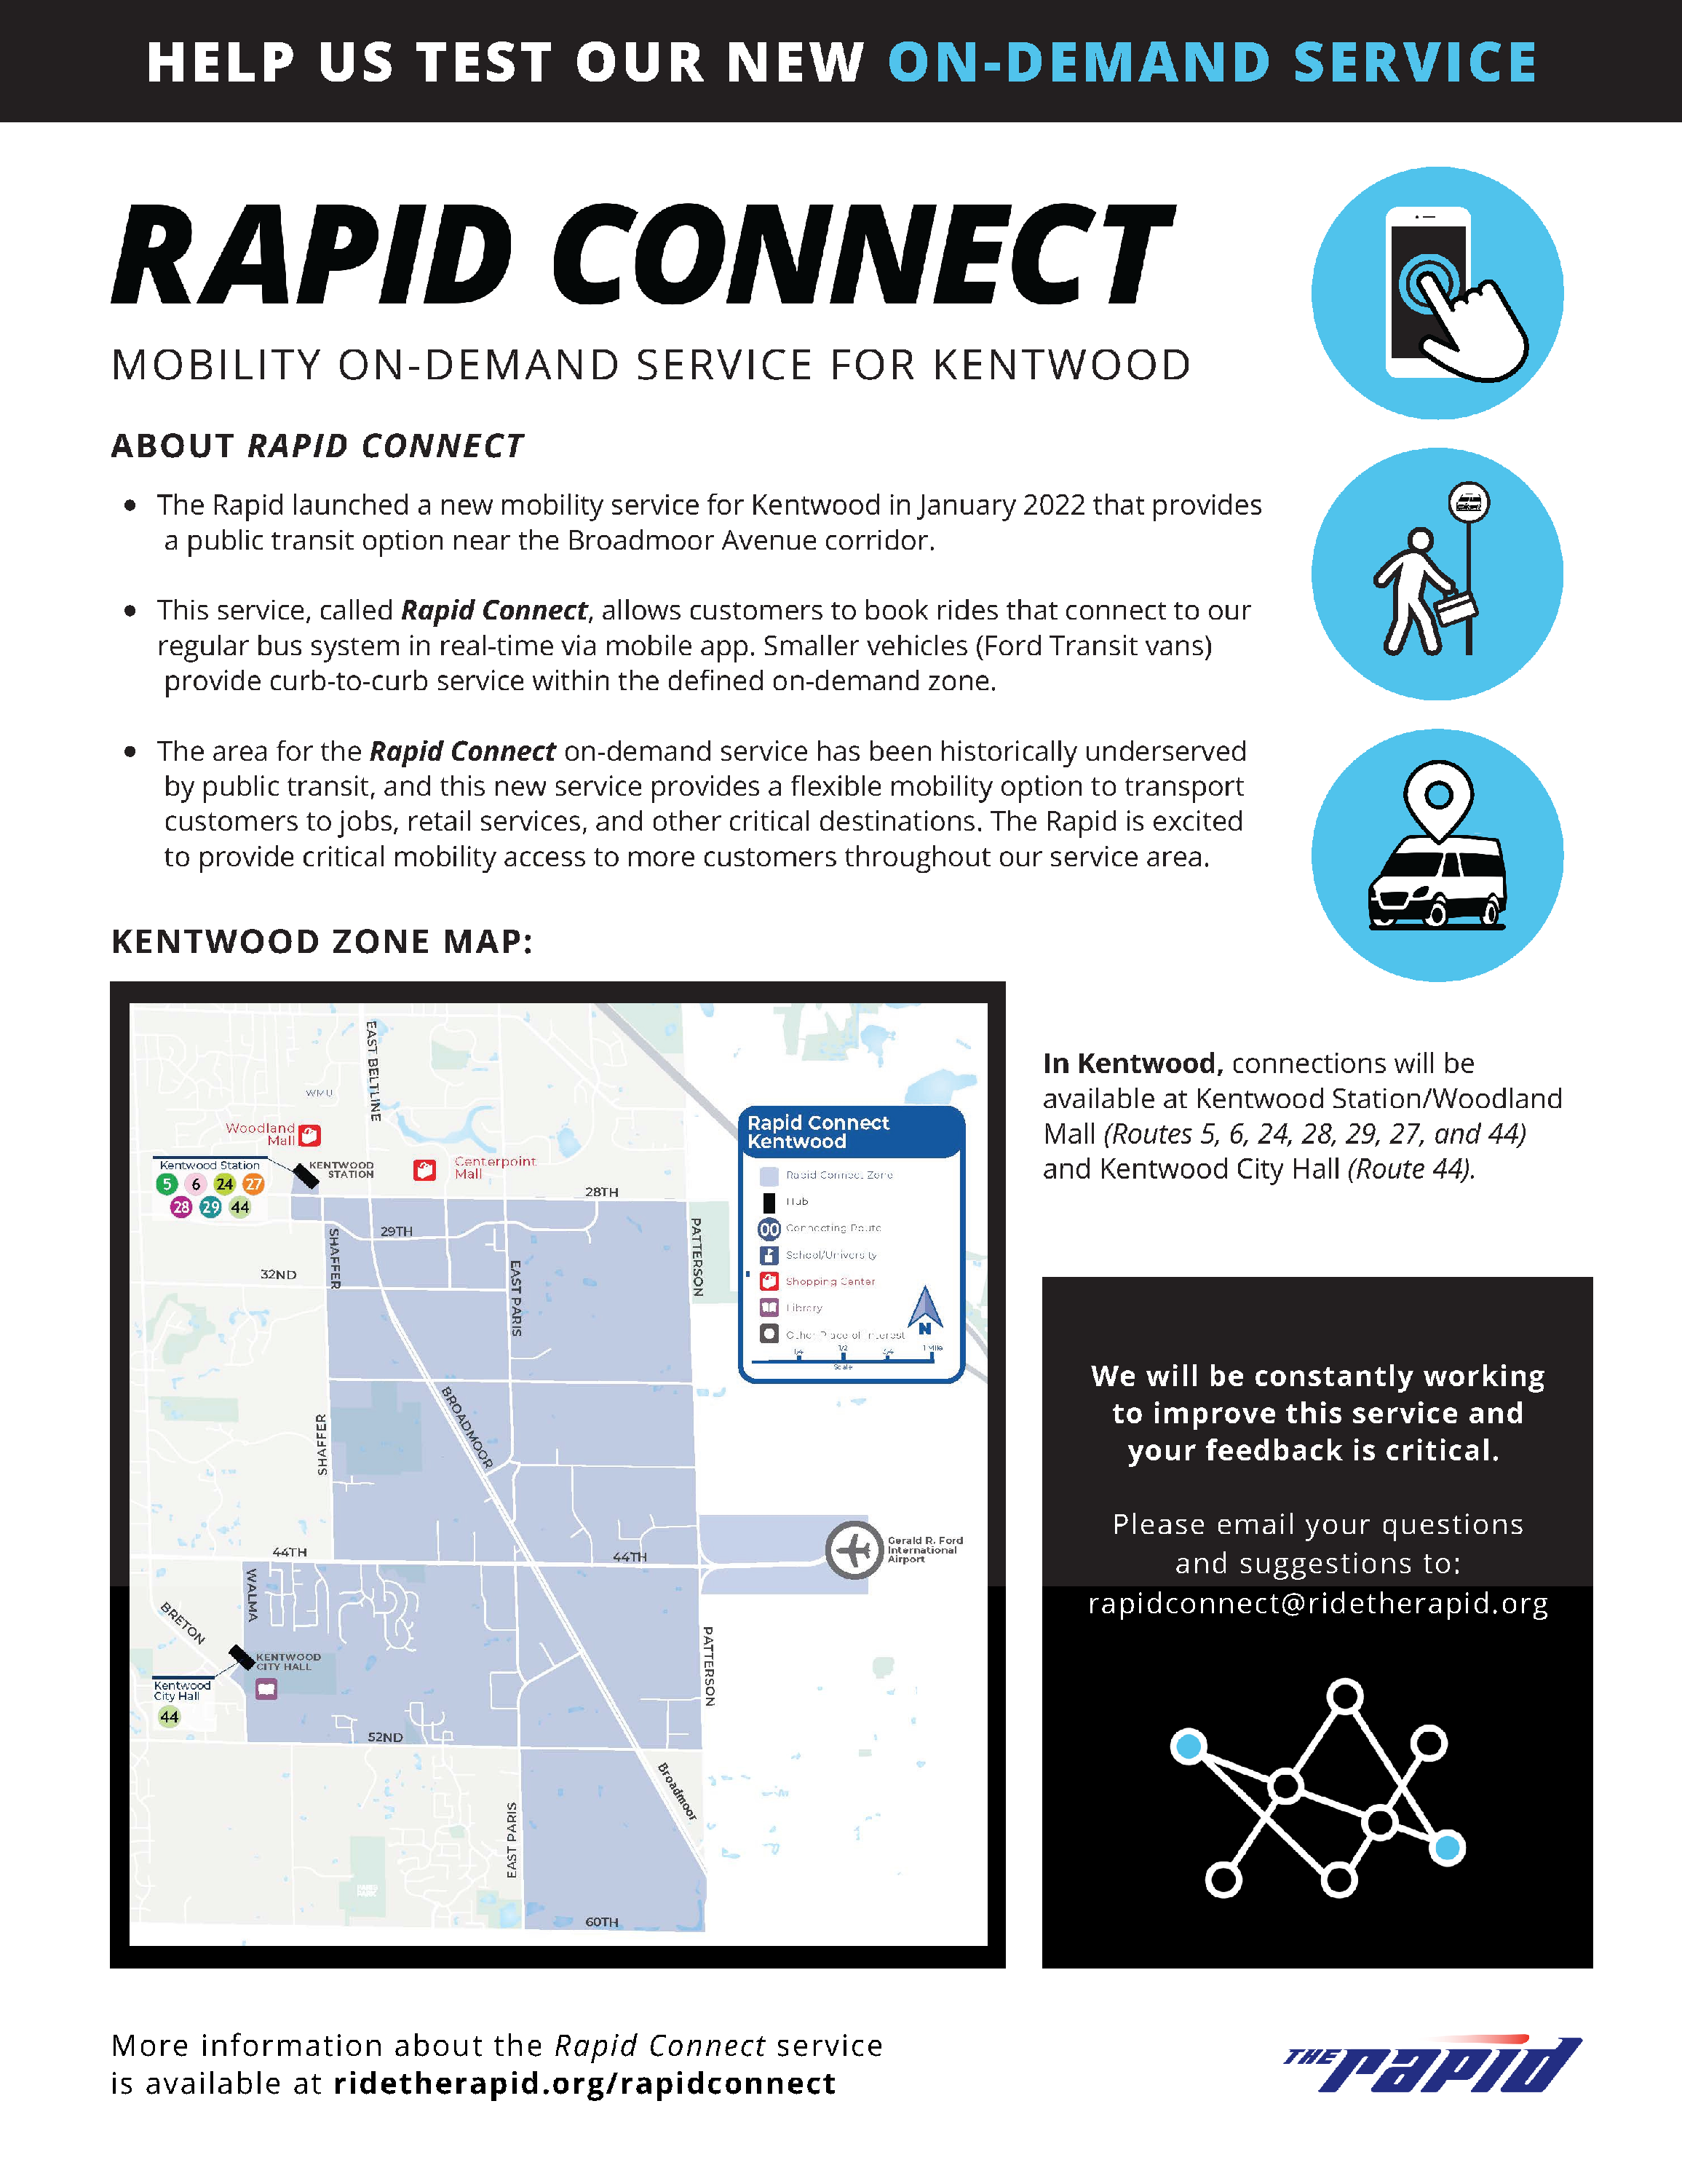 Page 1 of the educational handout about Rapid Connect in Kentwood